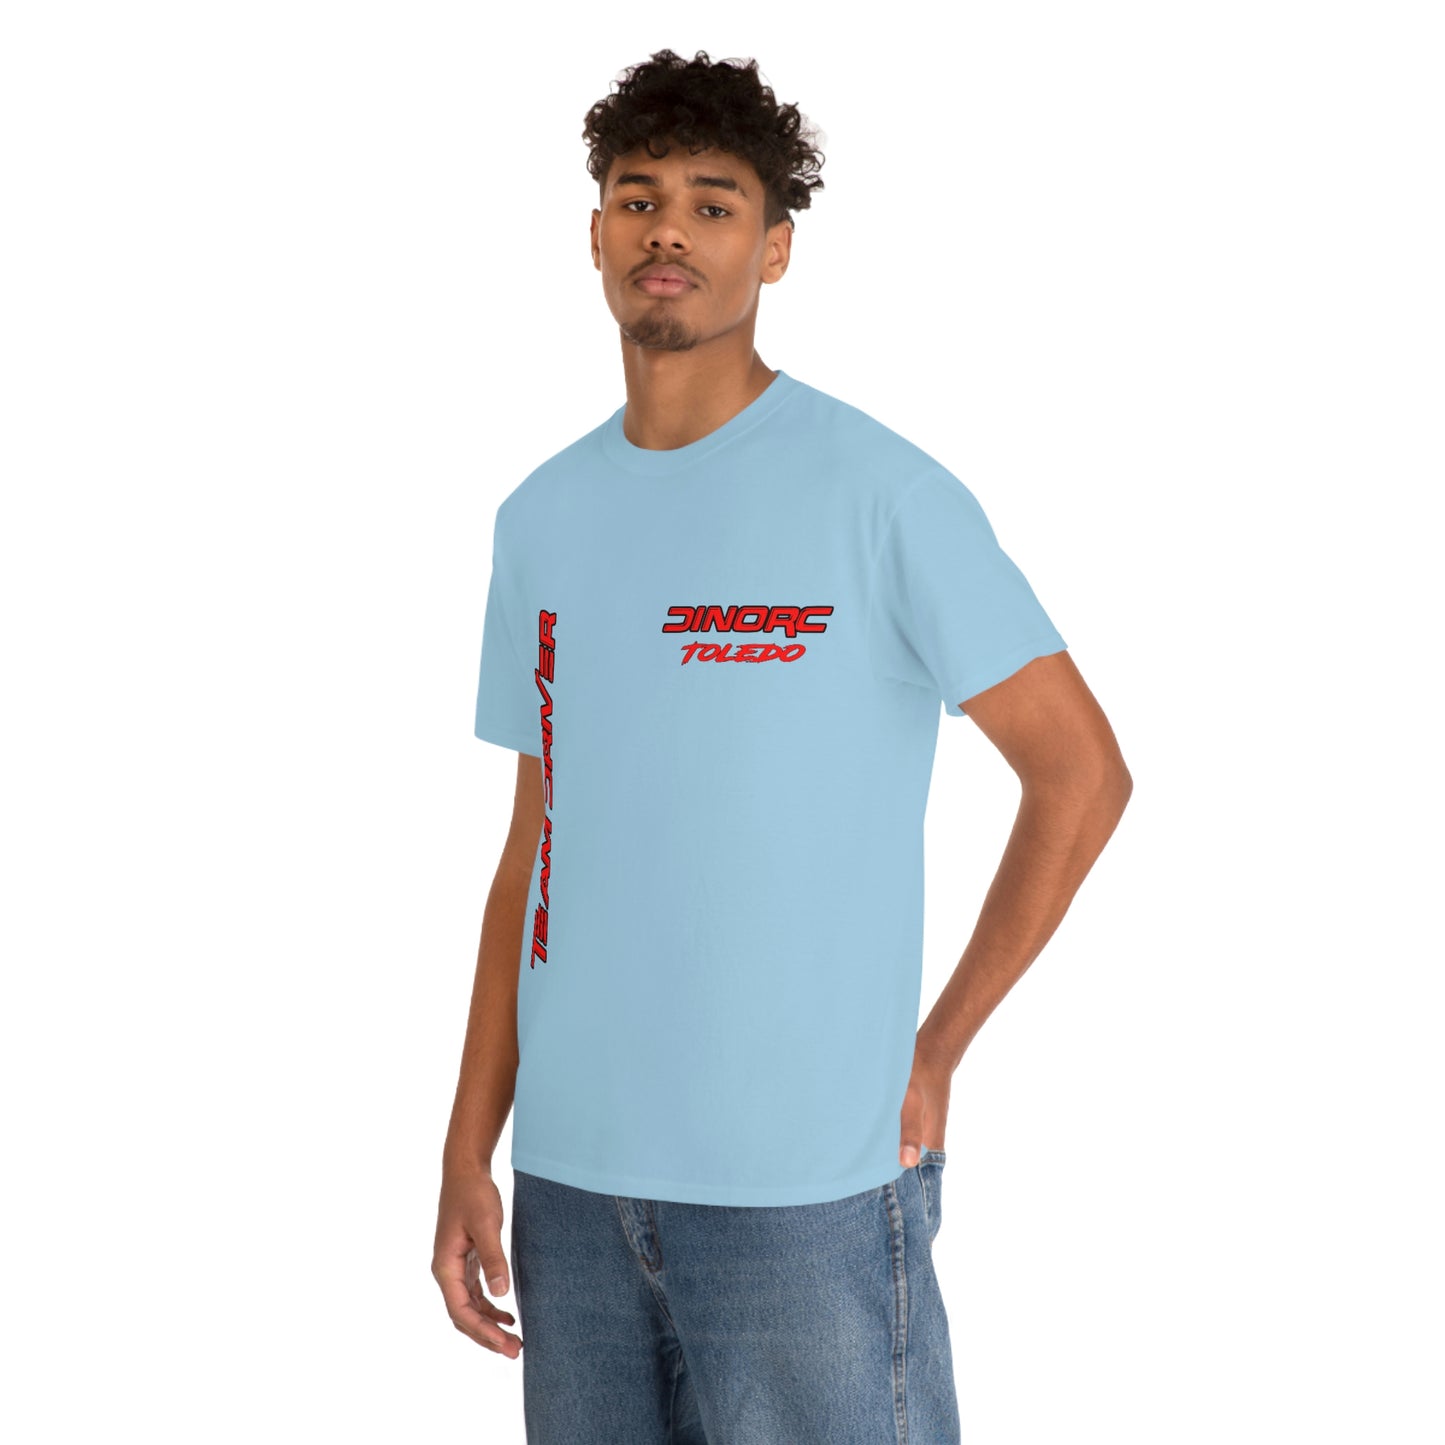 Team Driver Toledo Front and Back DinoRc Logo T-Shirt S-5x 5 colors